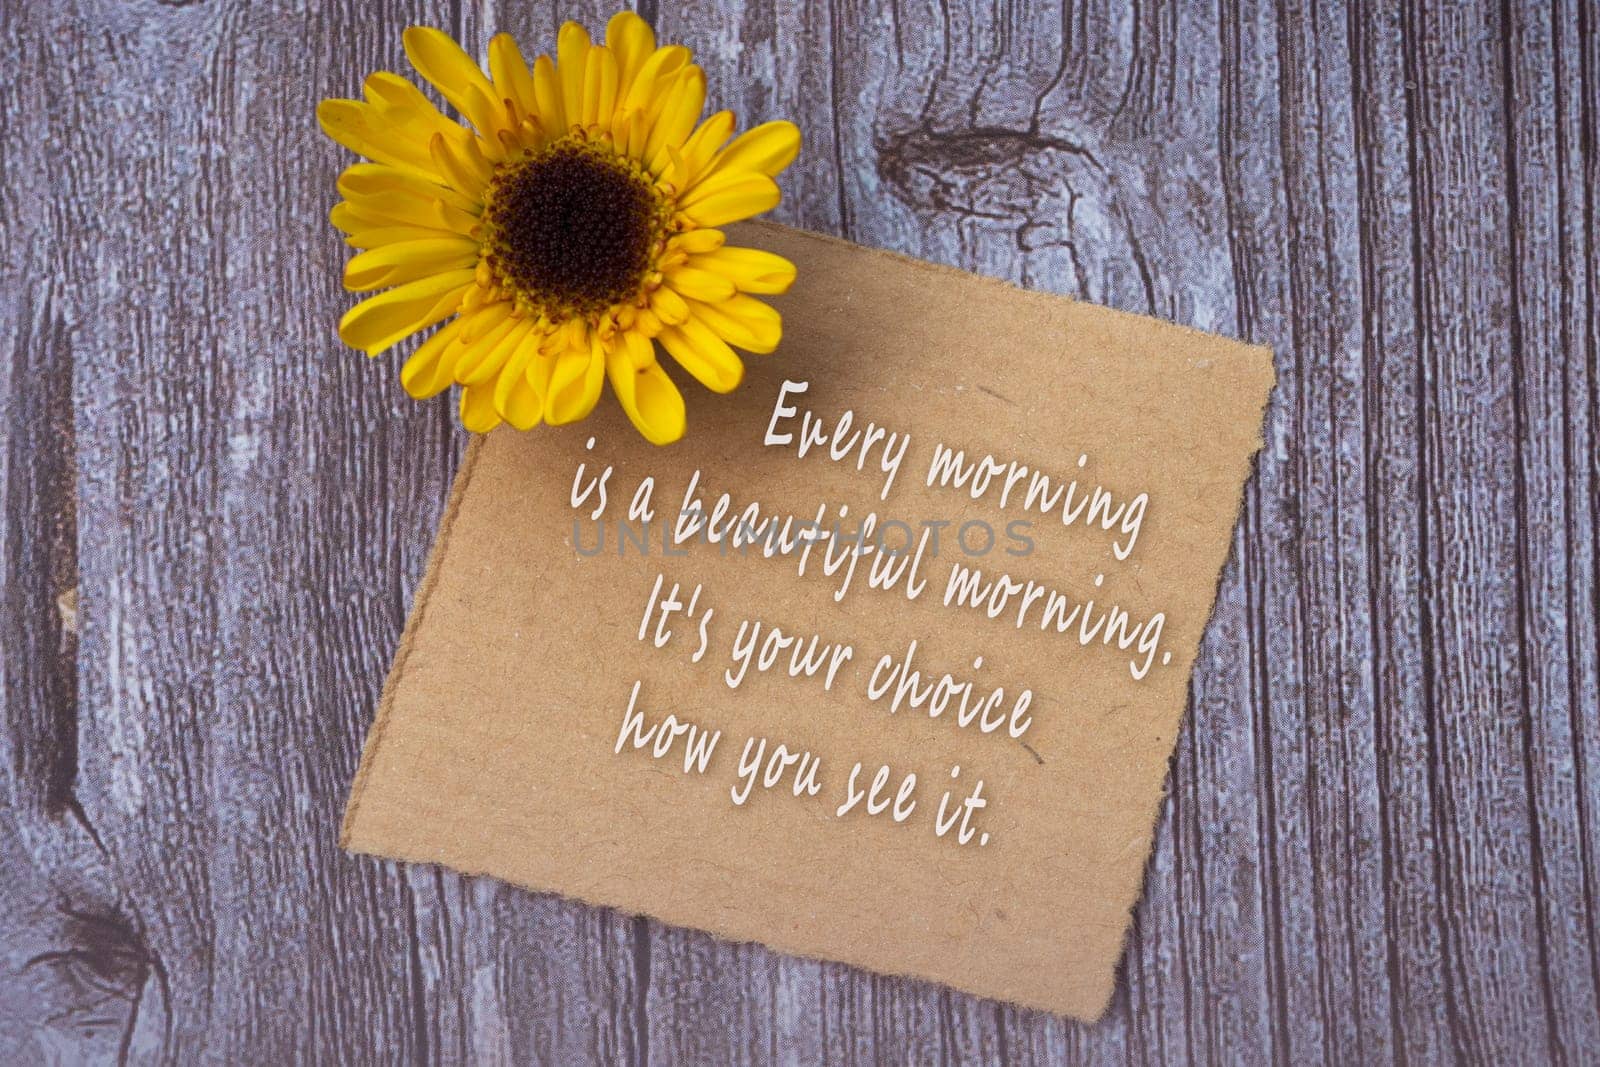 Motivational on brown note with gerbera yellow flower on wooden surface - Every morning is a beautiful morning, it is your choice how you see it.